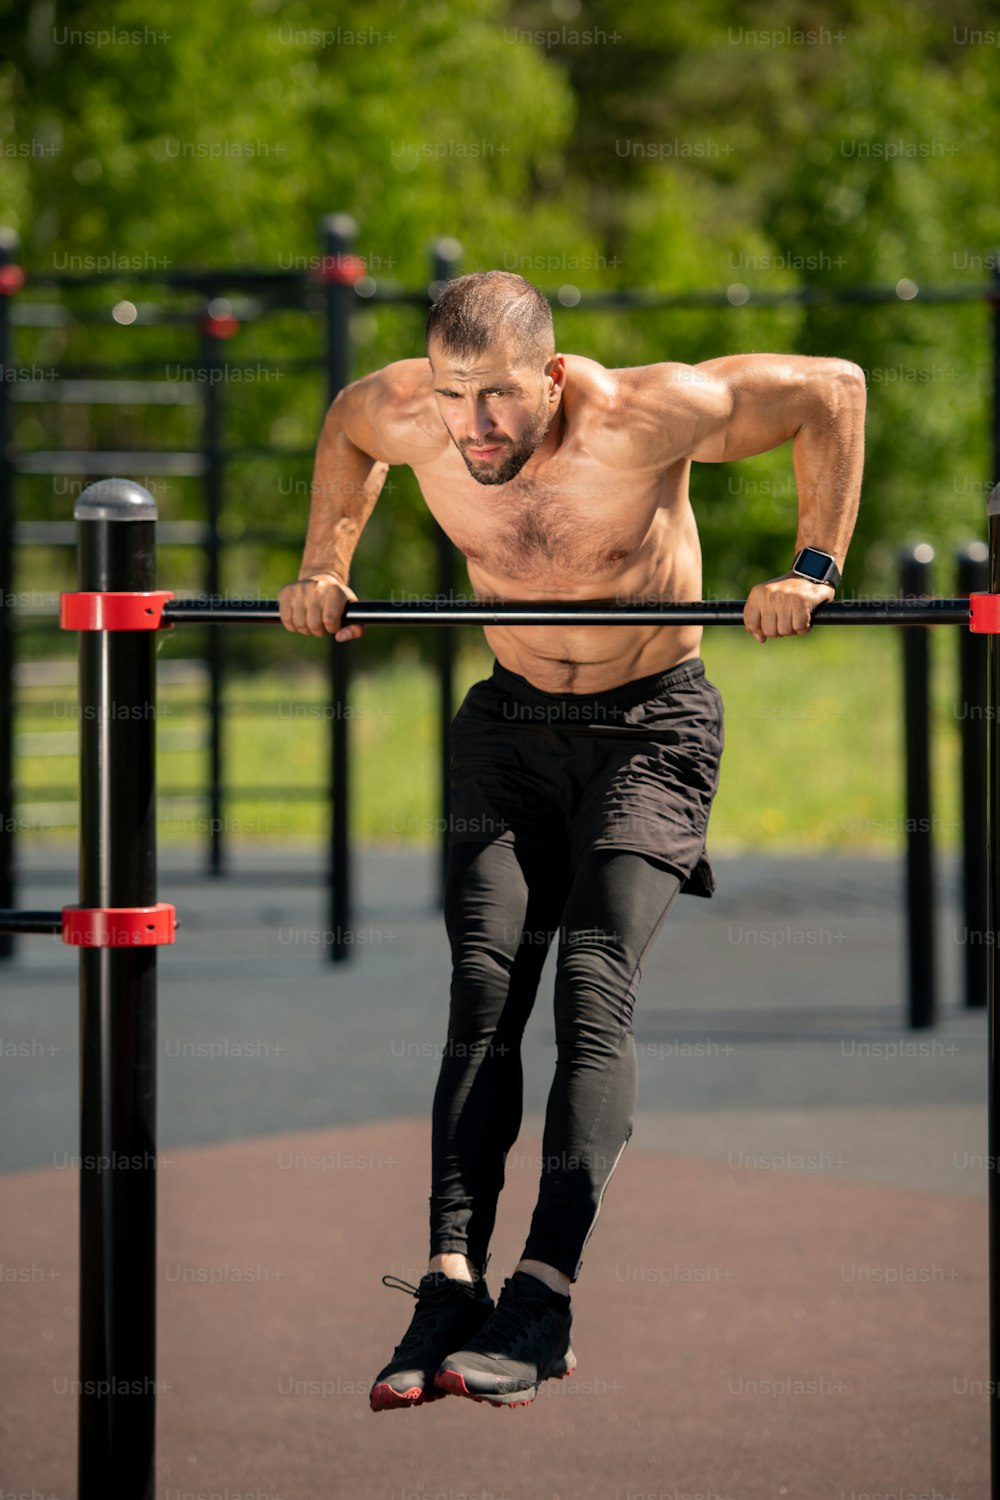 Young muscular athlete bending over sports bar while hanging over ground during physical exercise